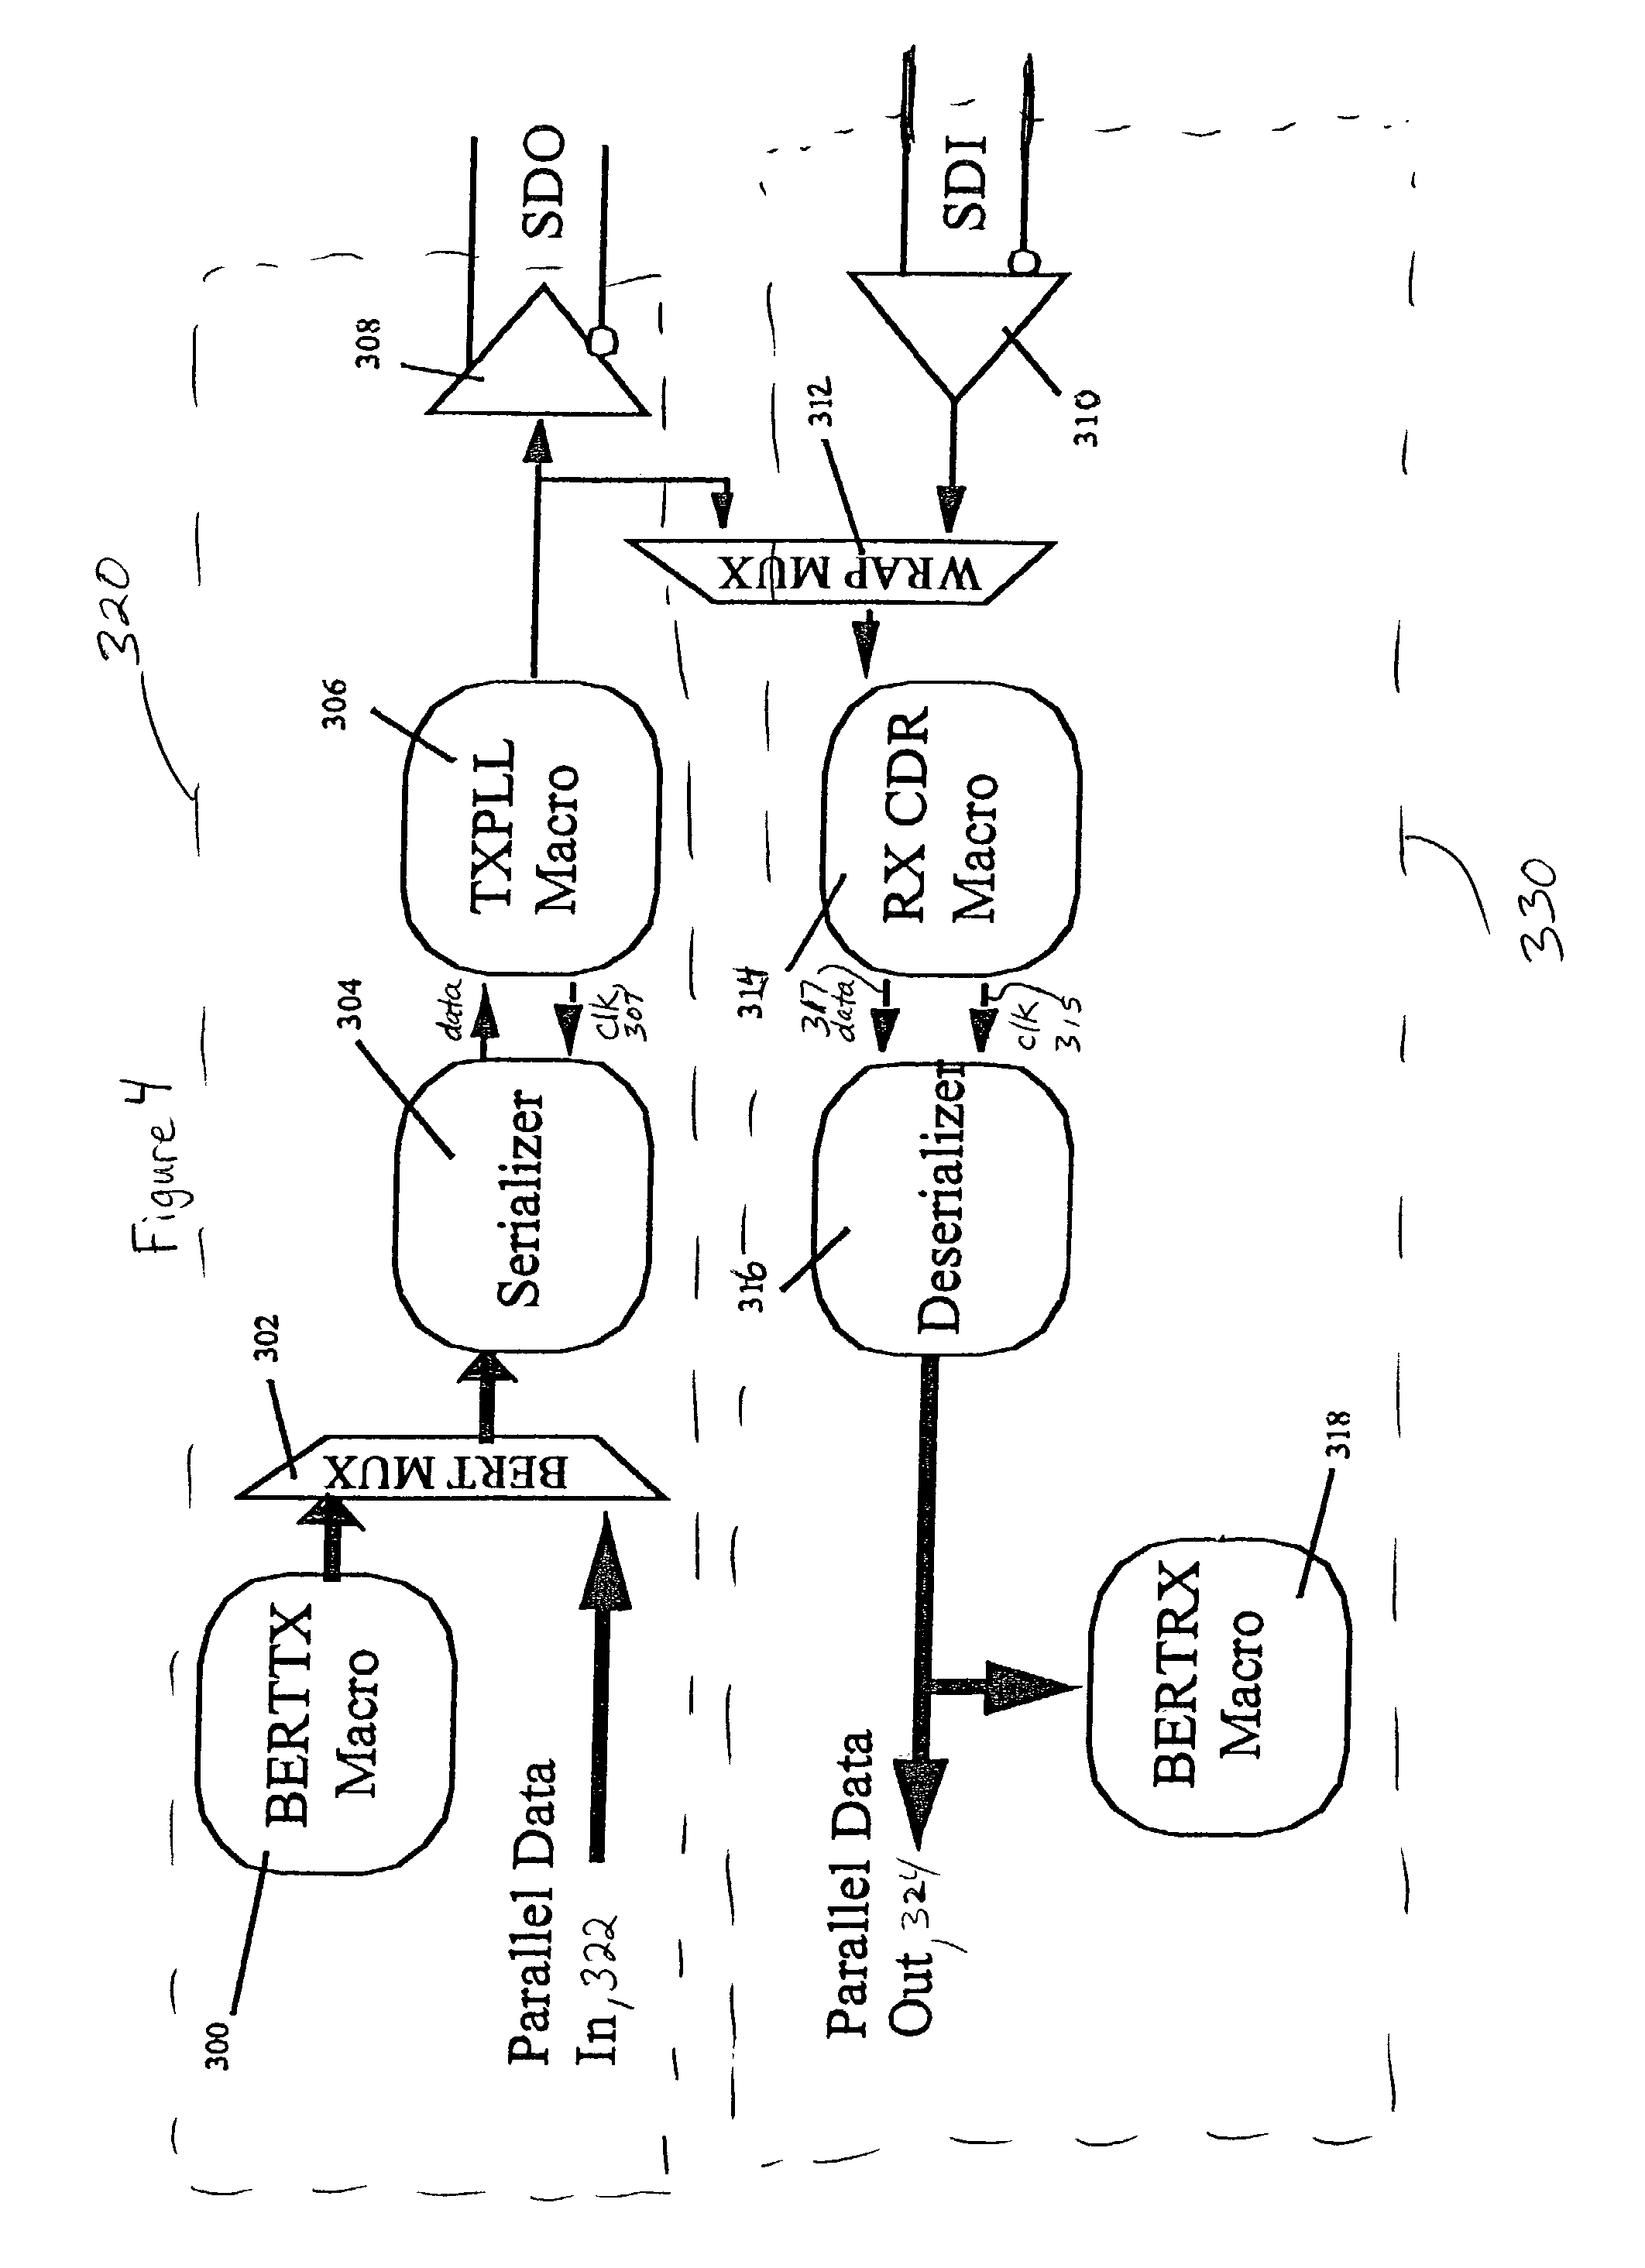 On-chip system and method for measuring jitter tolerance of a clock and data recovery circuit